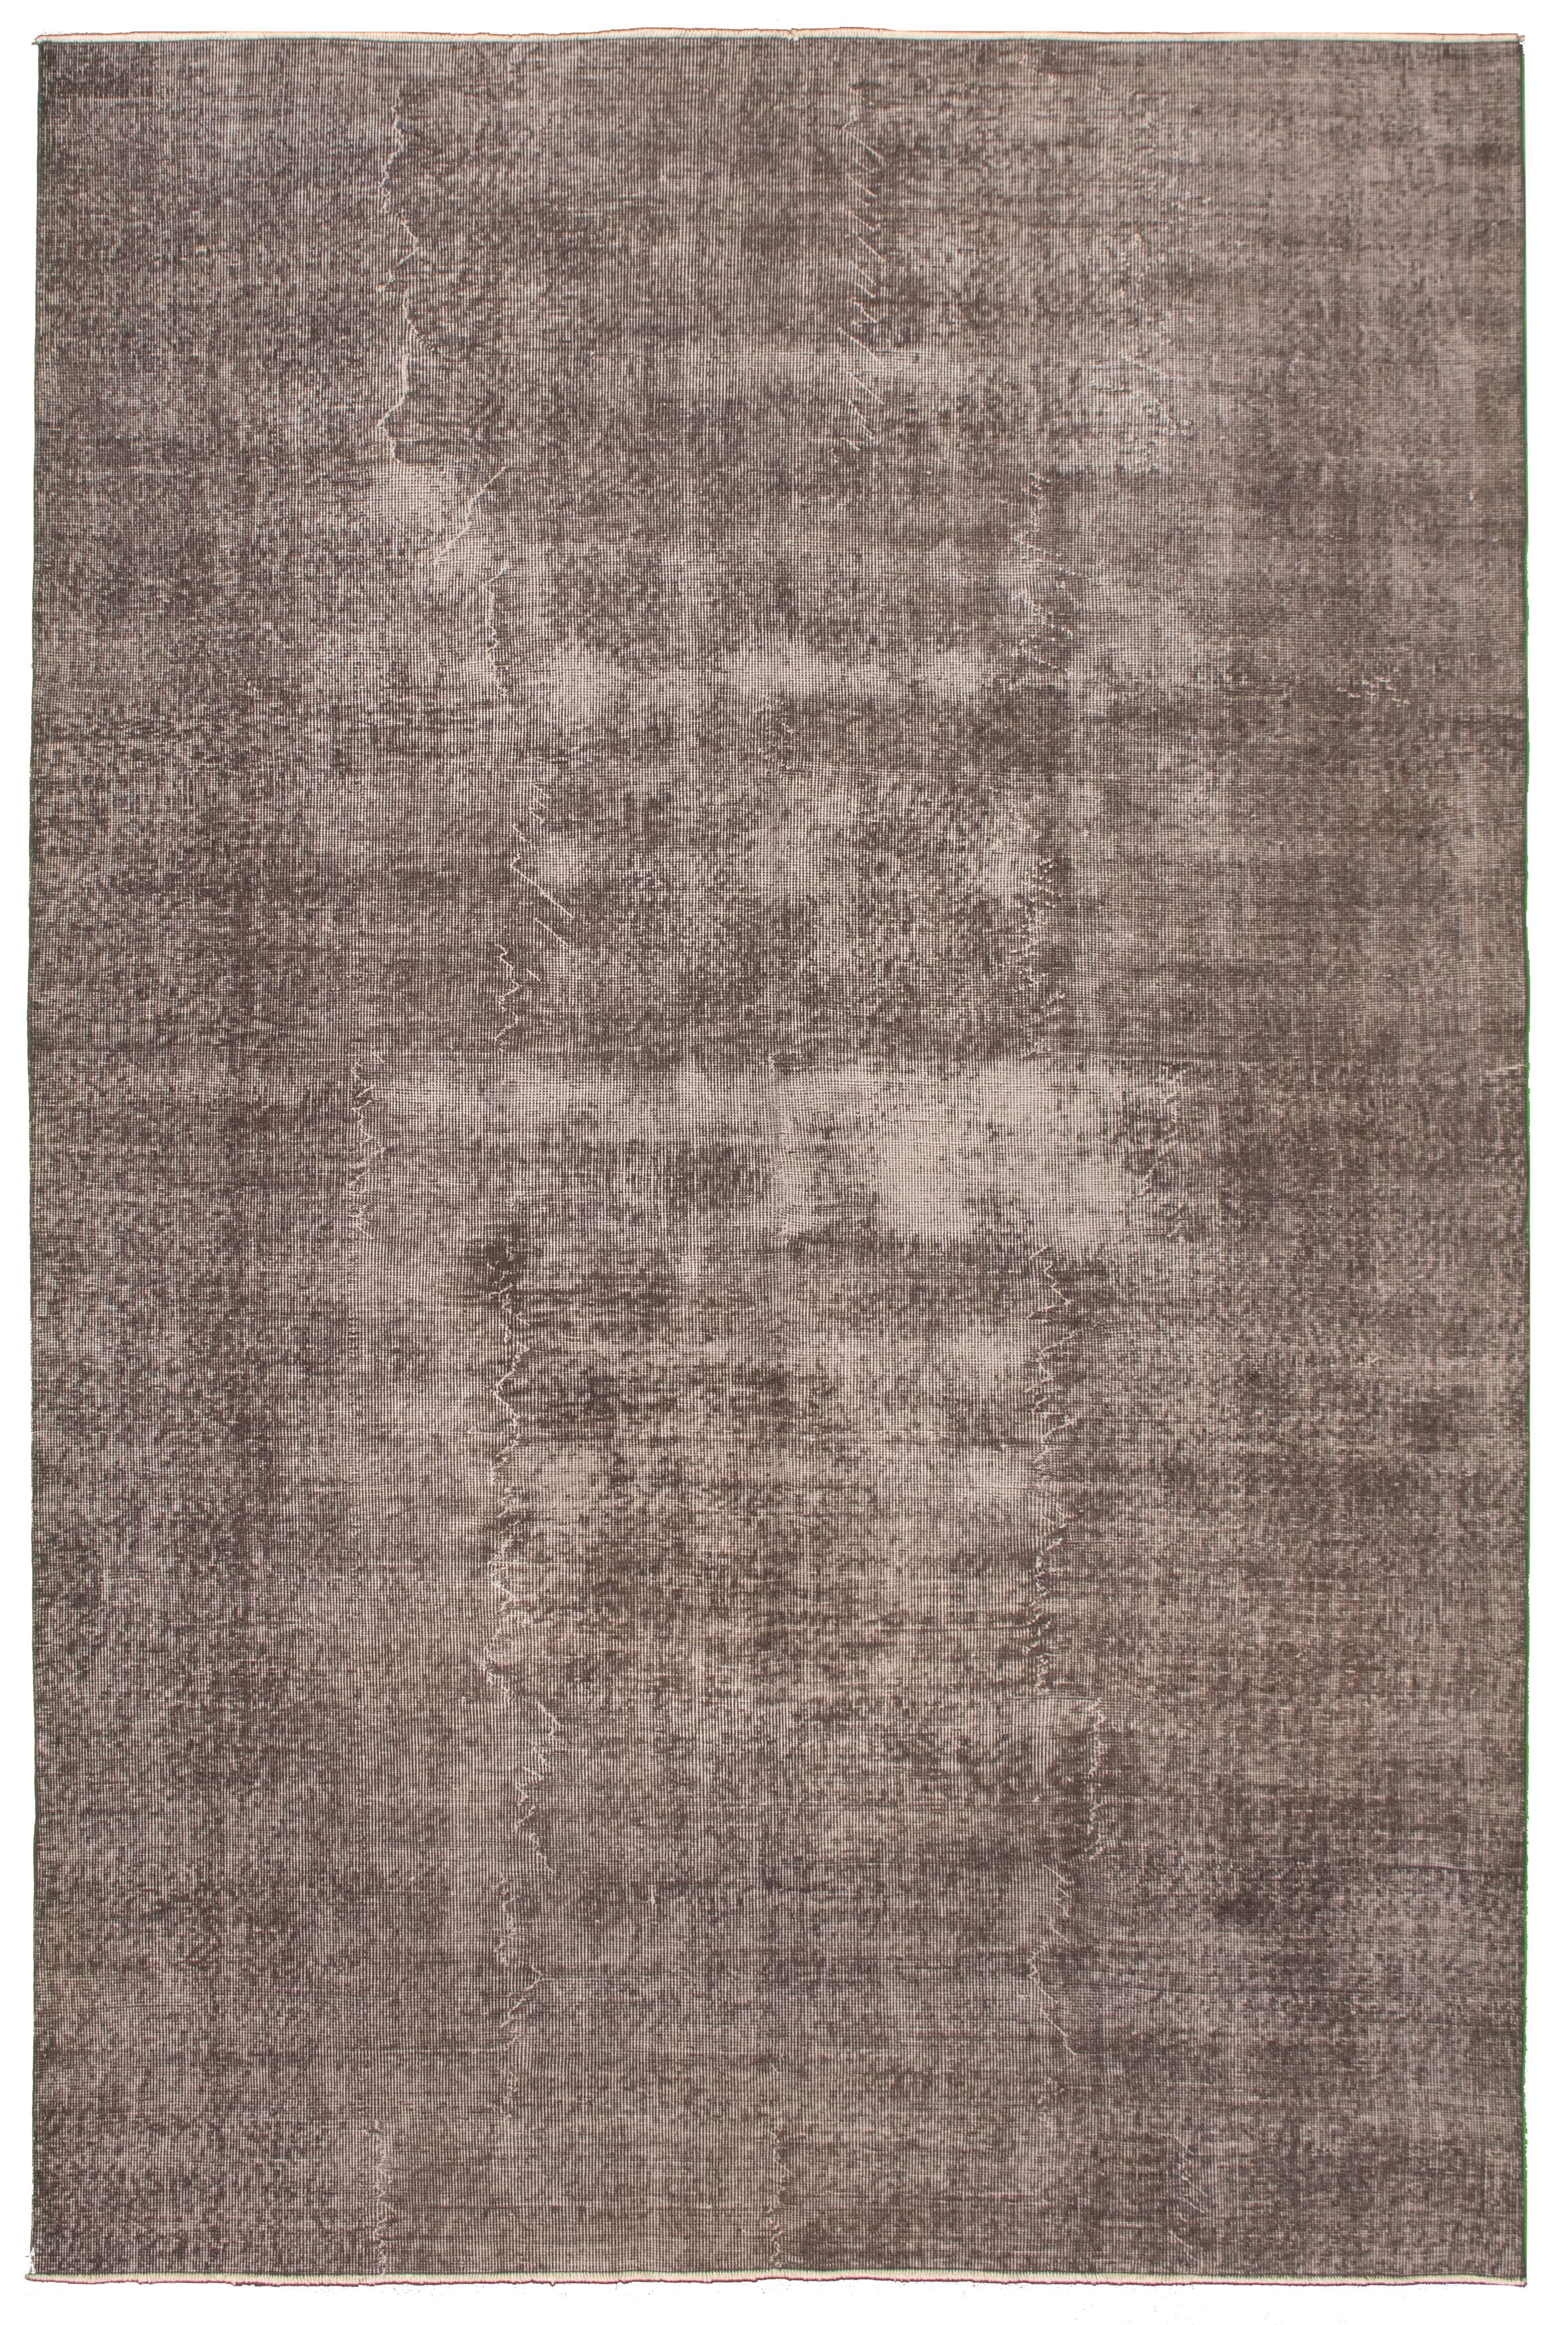 Hand-knotted Color Transition Dark Grey Wool Rug 6'7" x 10'2" Size: 6'7" x 10'2"  